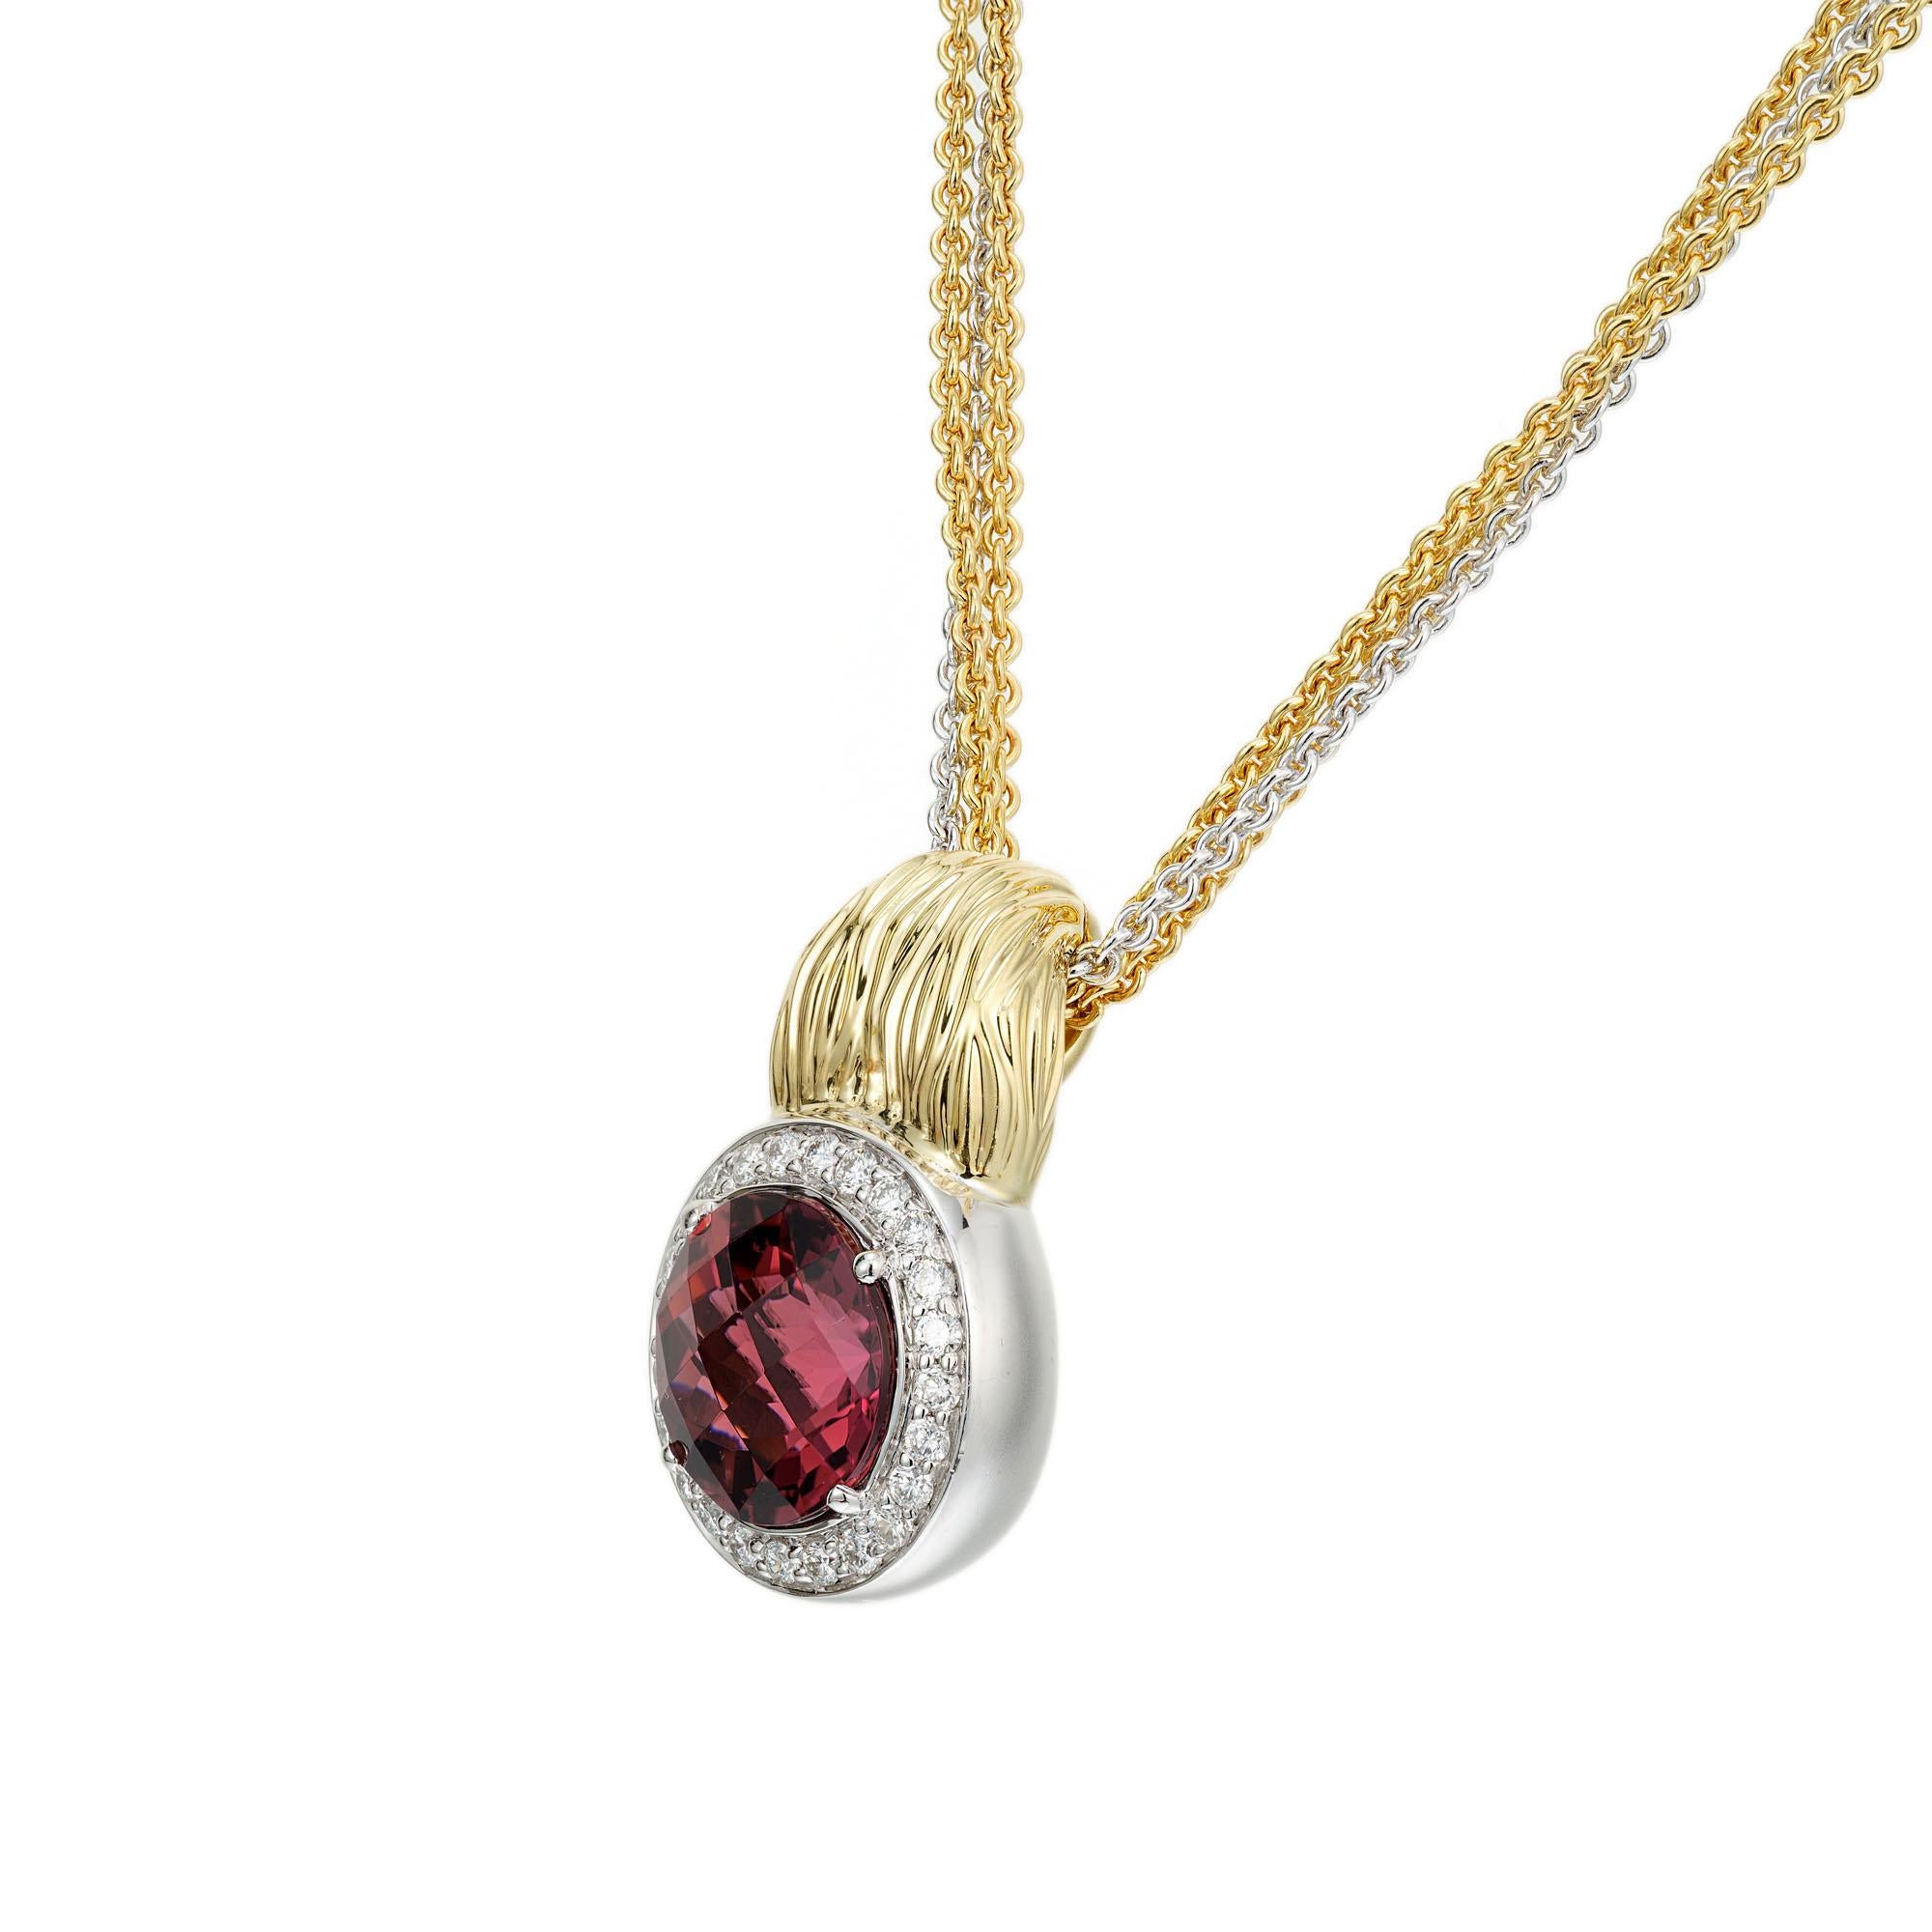 Spark bright pink tourmaline diamond pendant two-tone gold multi-strand necklace. Pink round tourmaline with a halo of round cut diamonds.  18k yellow and white gold from the faceted collection. Pendant and chain both stamped Spark 18k. 17 inches in